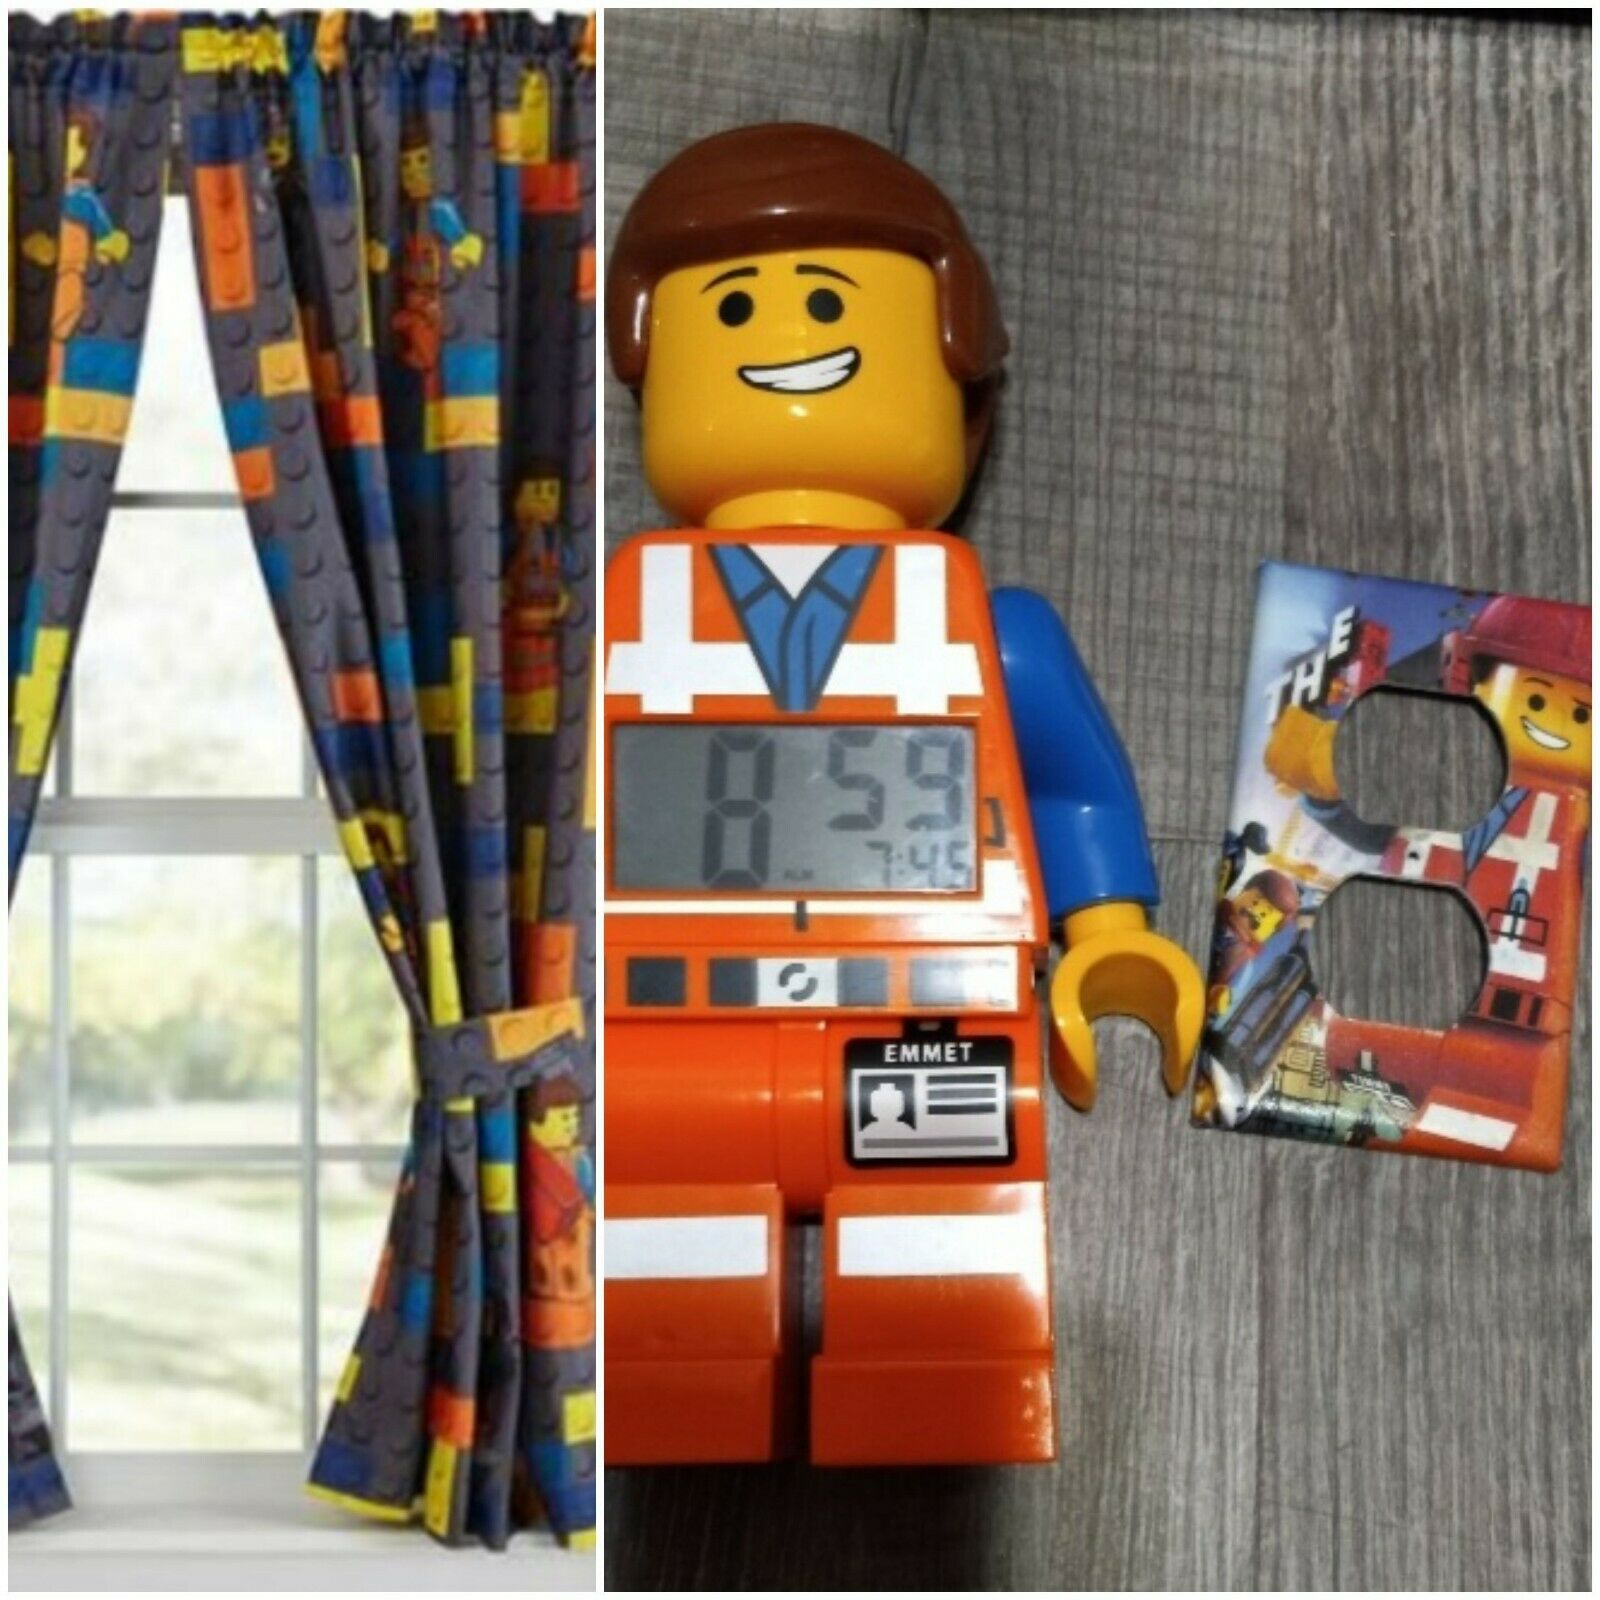 2014 The Lego Movie Lot Alarm Clock Hooded Bath Towel 4 Panels & Outlet Cover